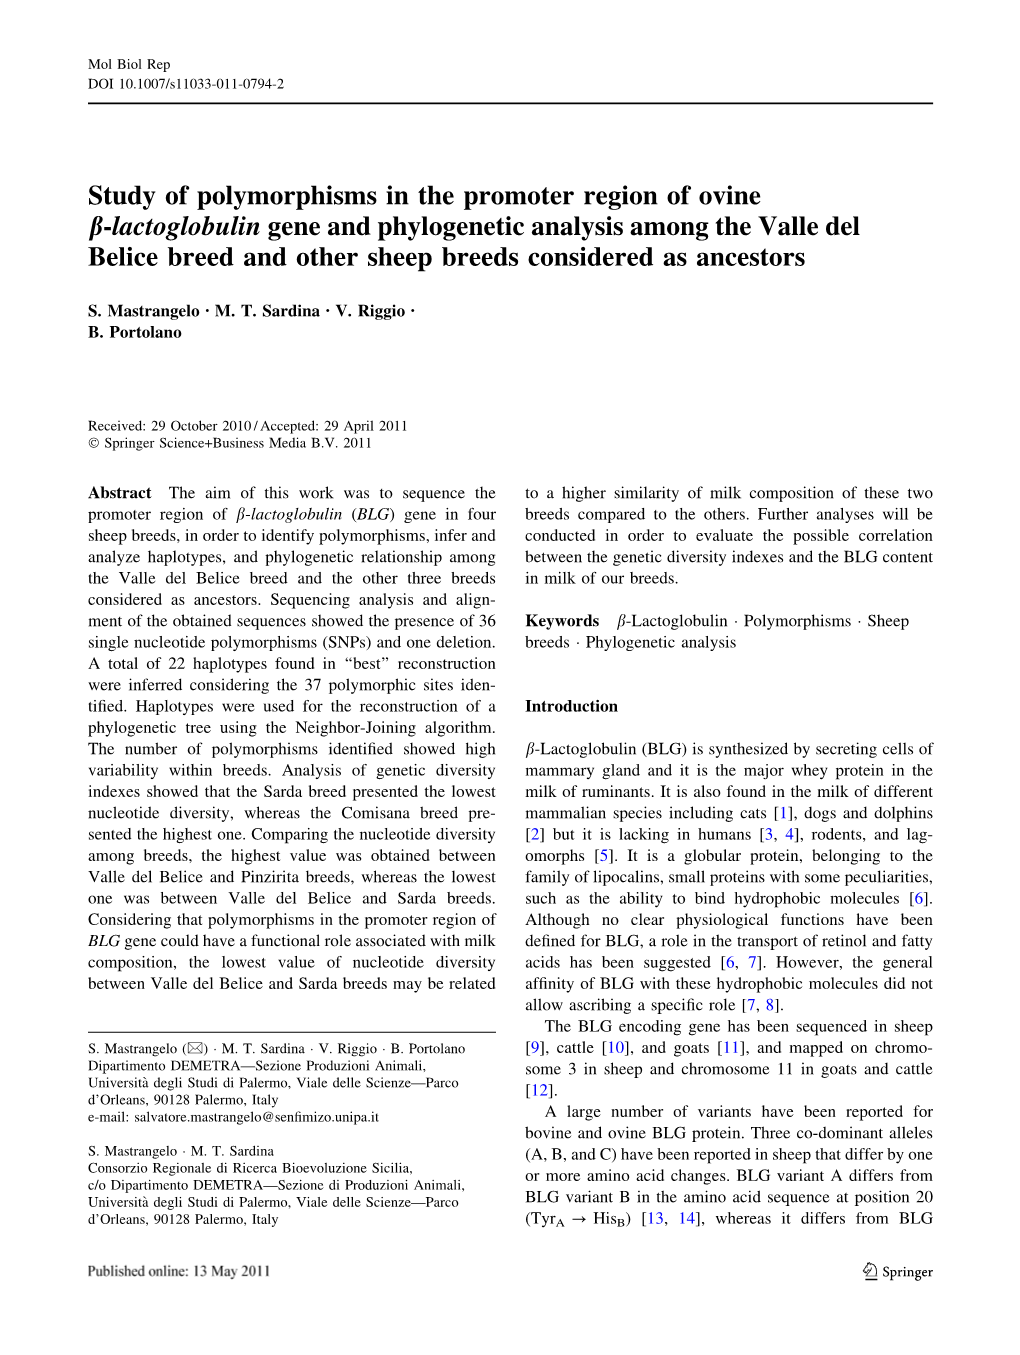 Study of Polymorphisms in the Promoter Region of Ovine B